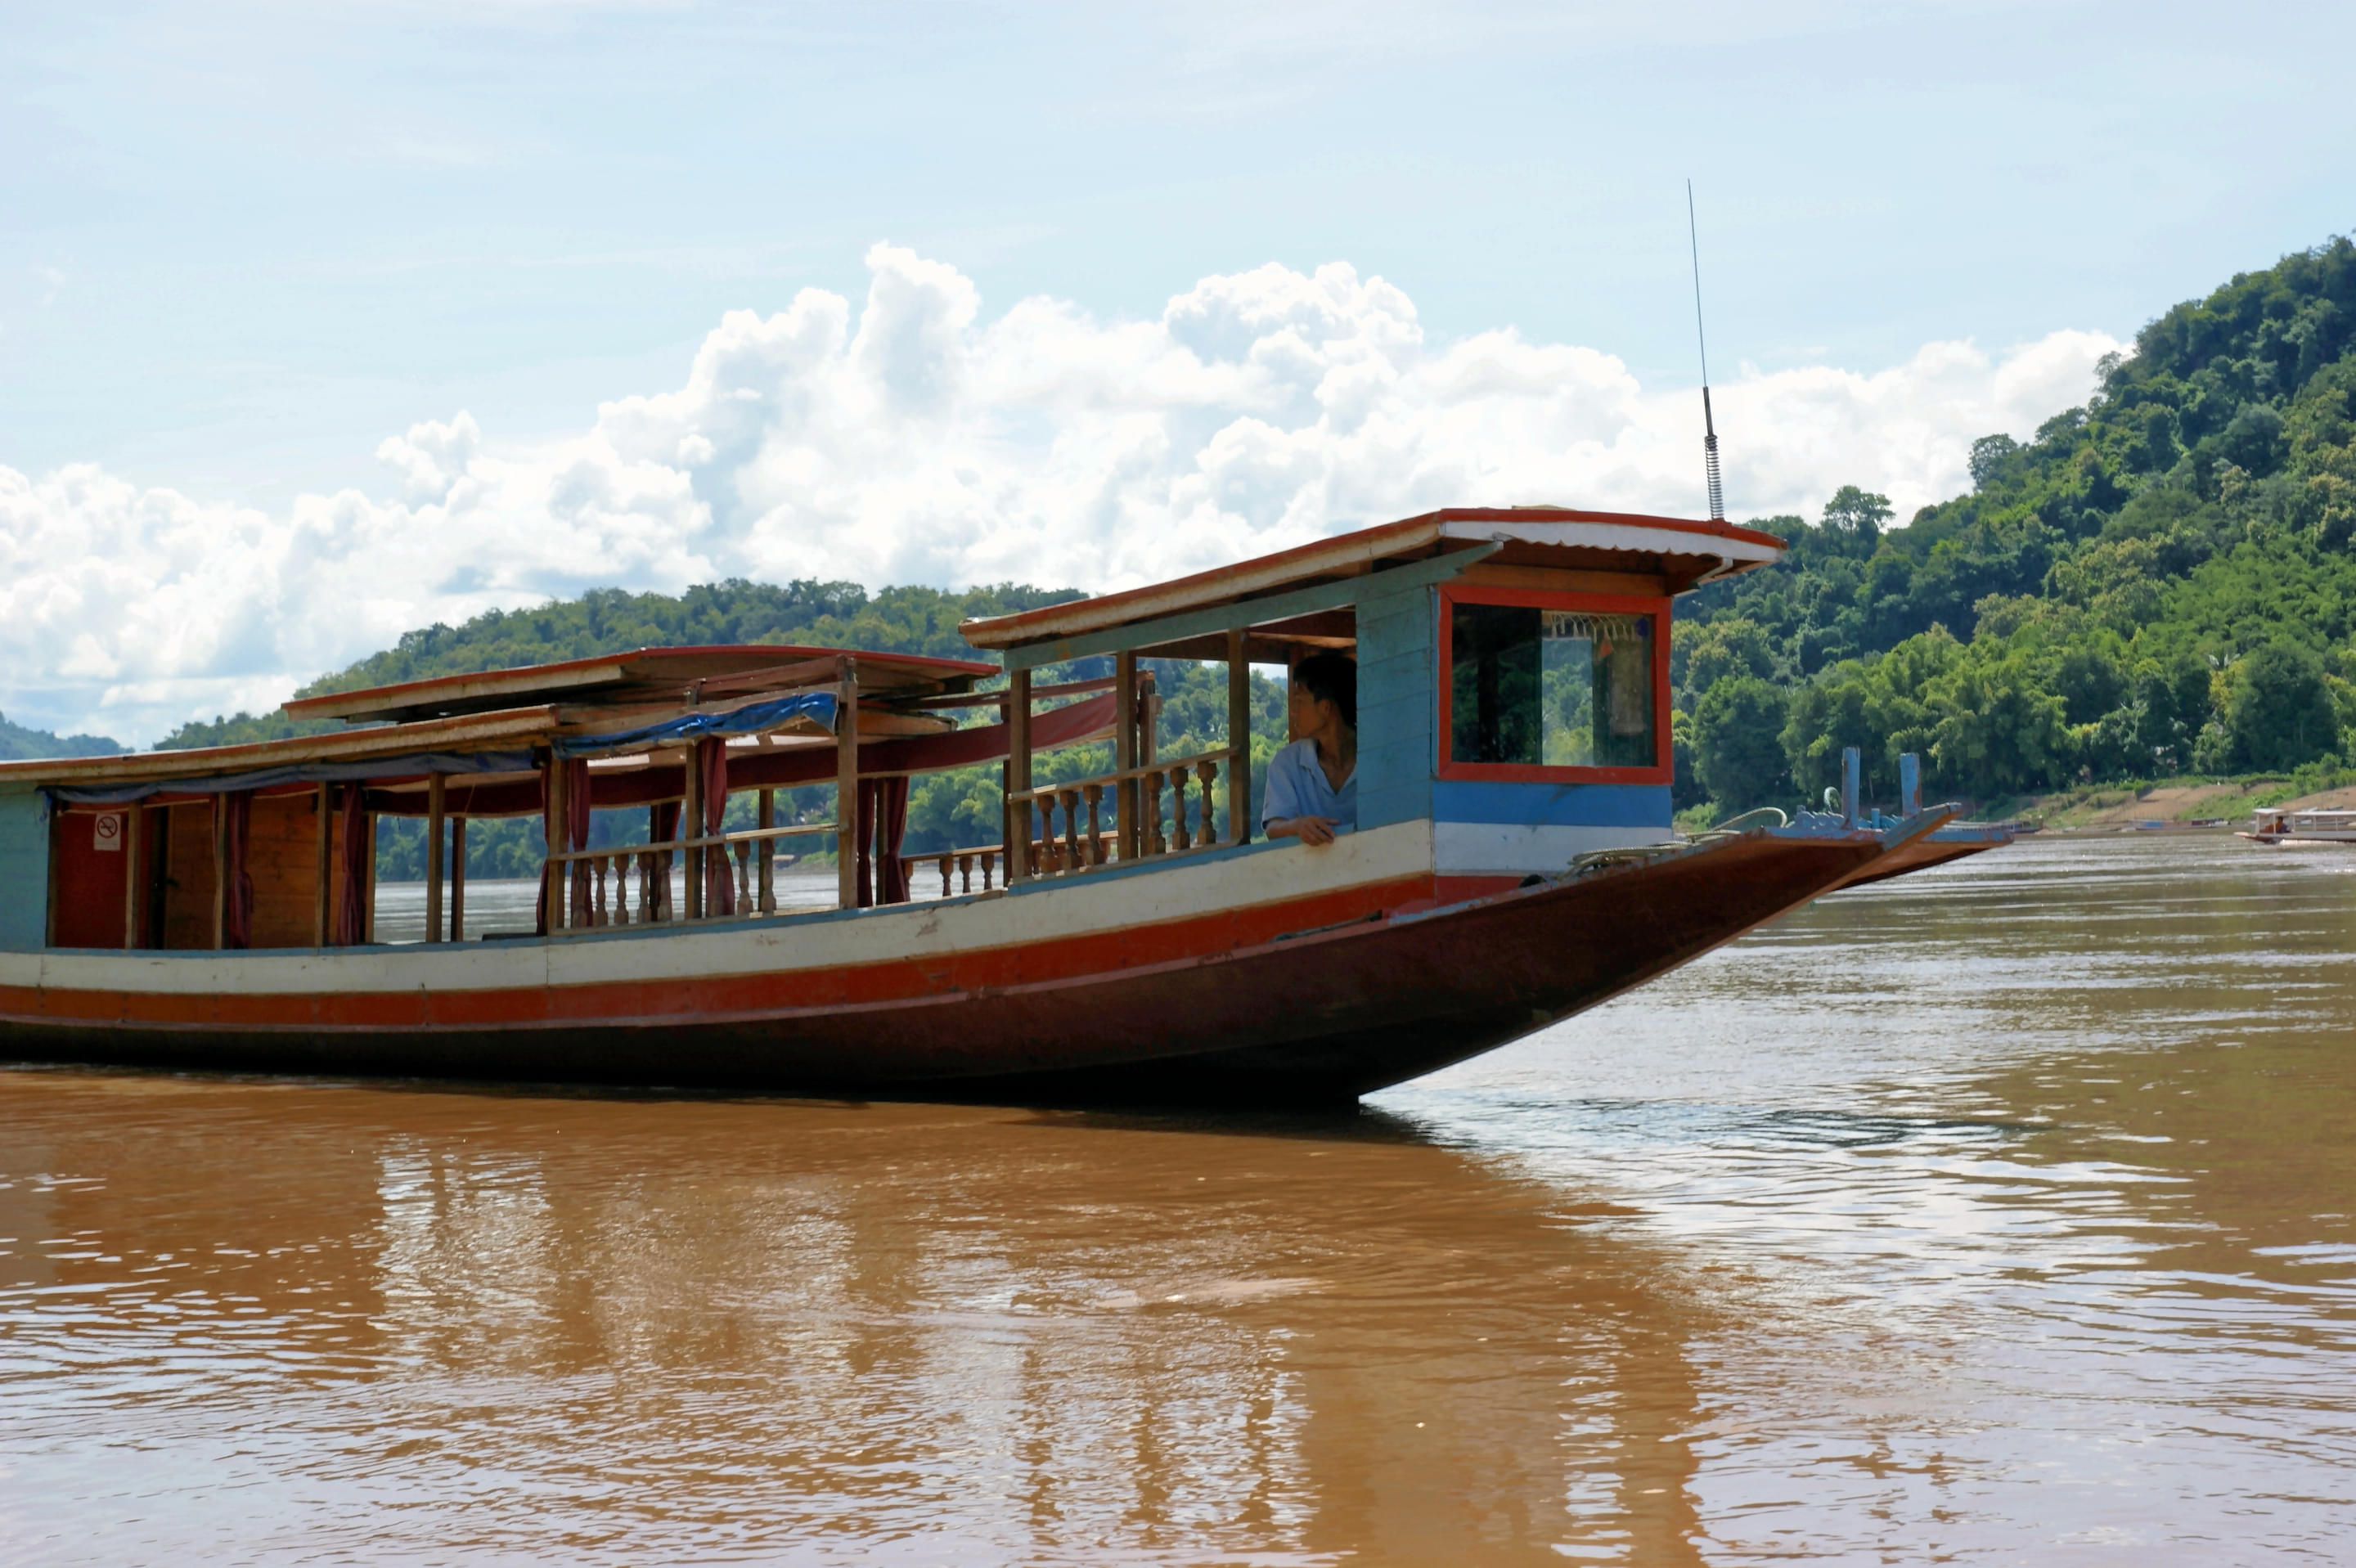 Mekong River Boat Trip Overview